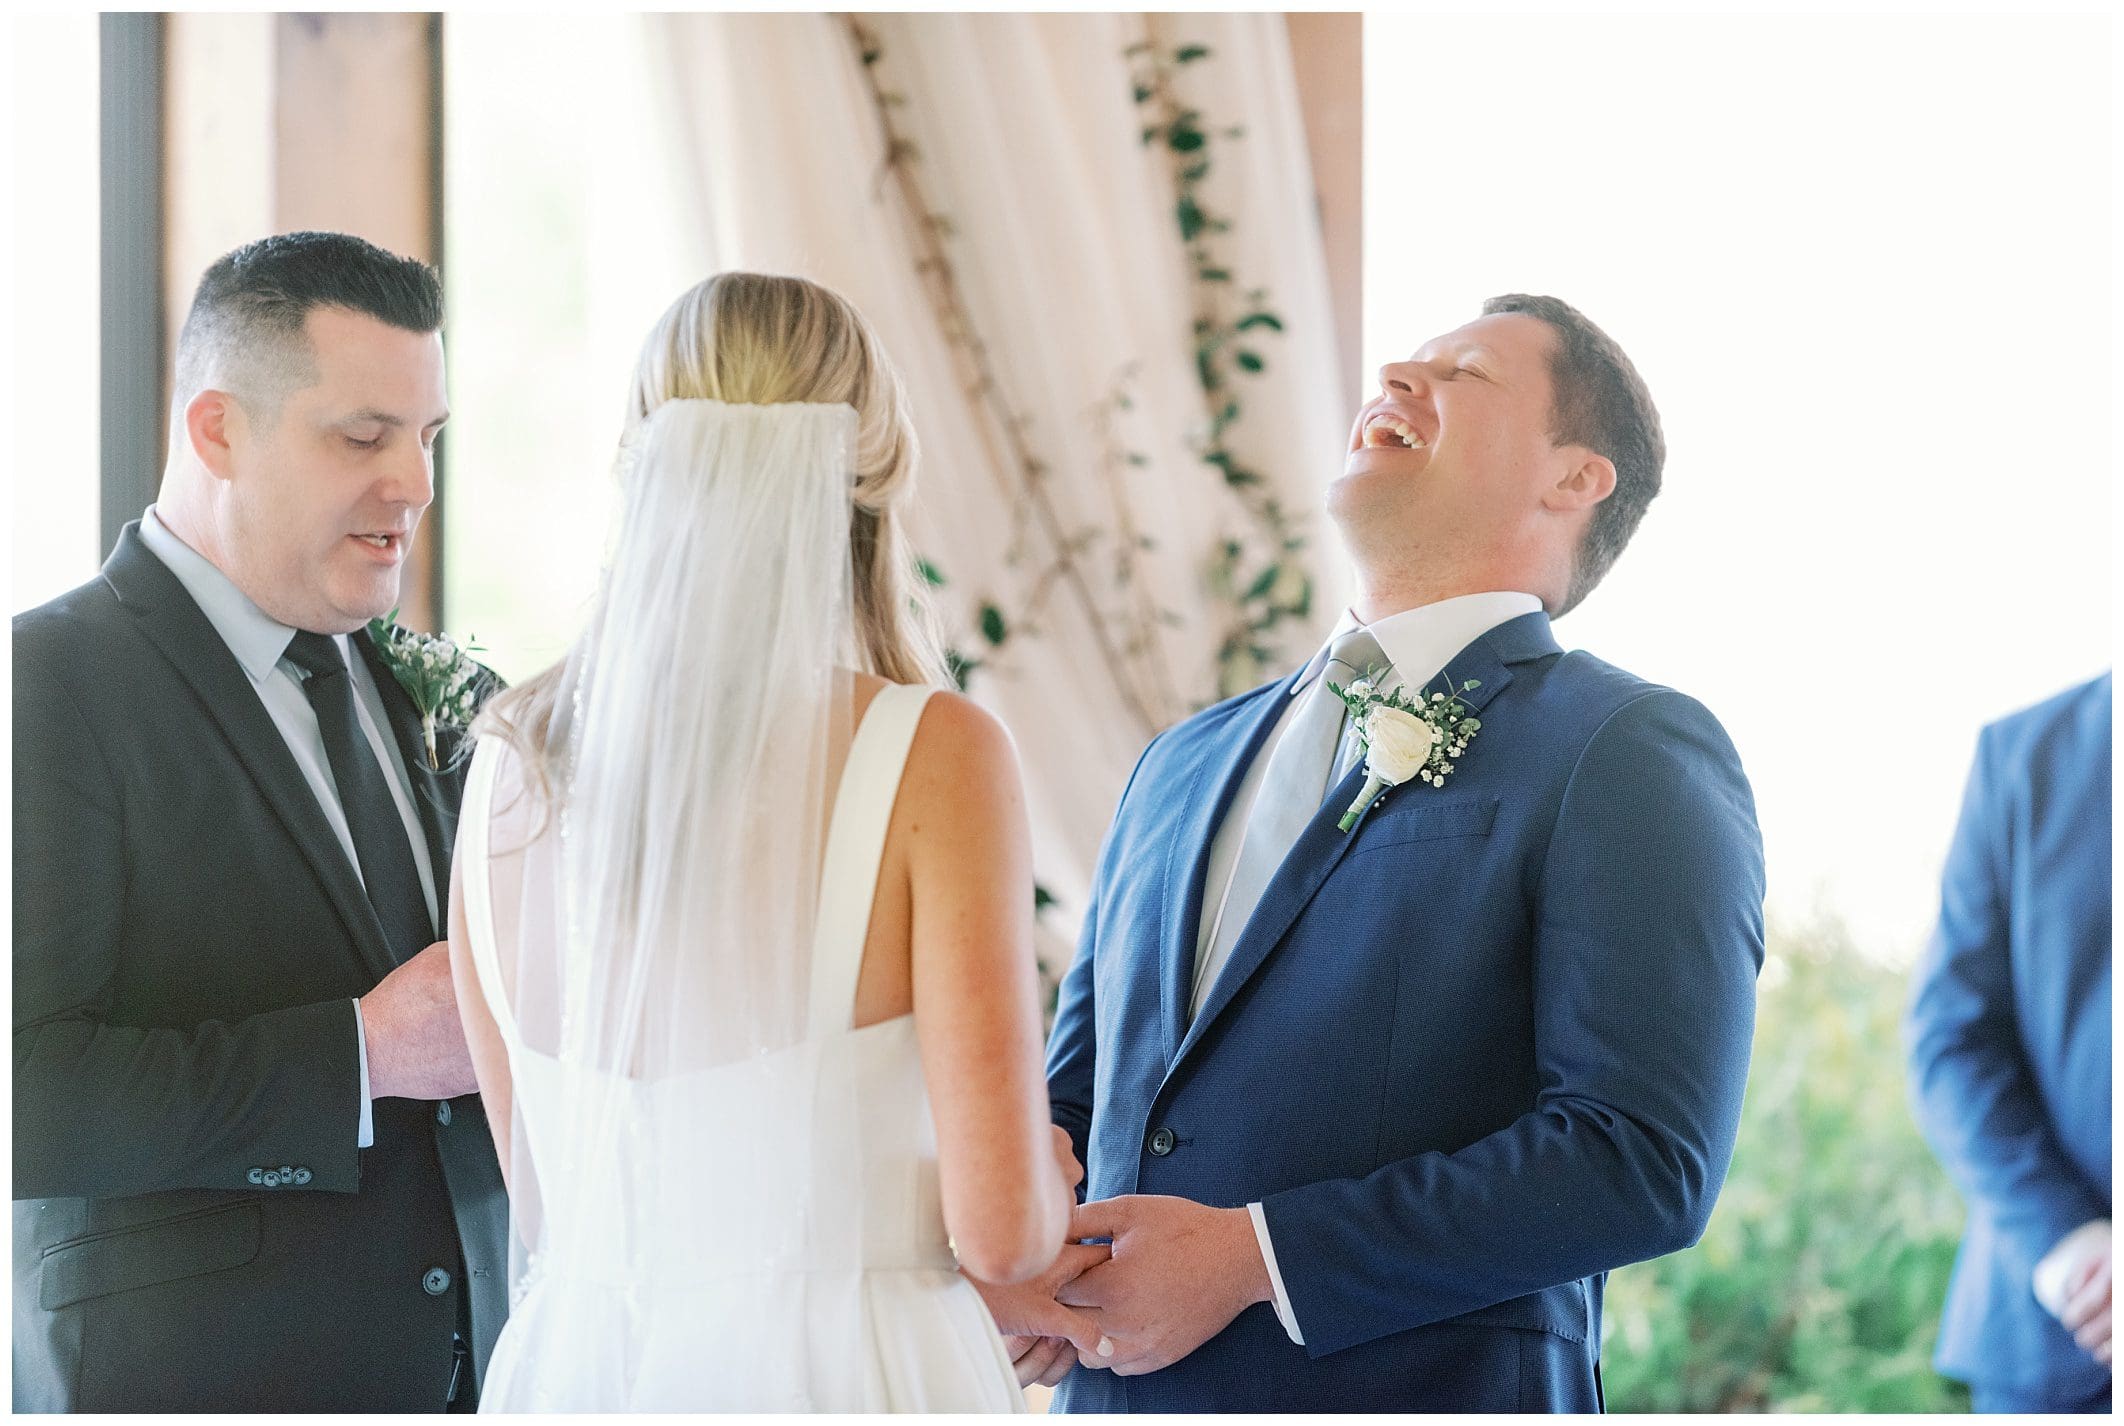 A bride and groom laughing during their wedding ceremony.